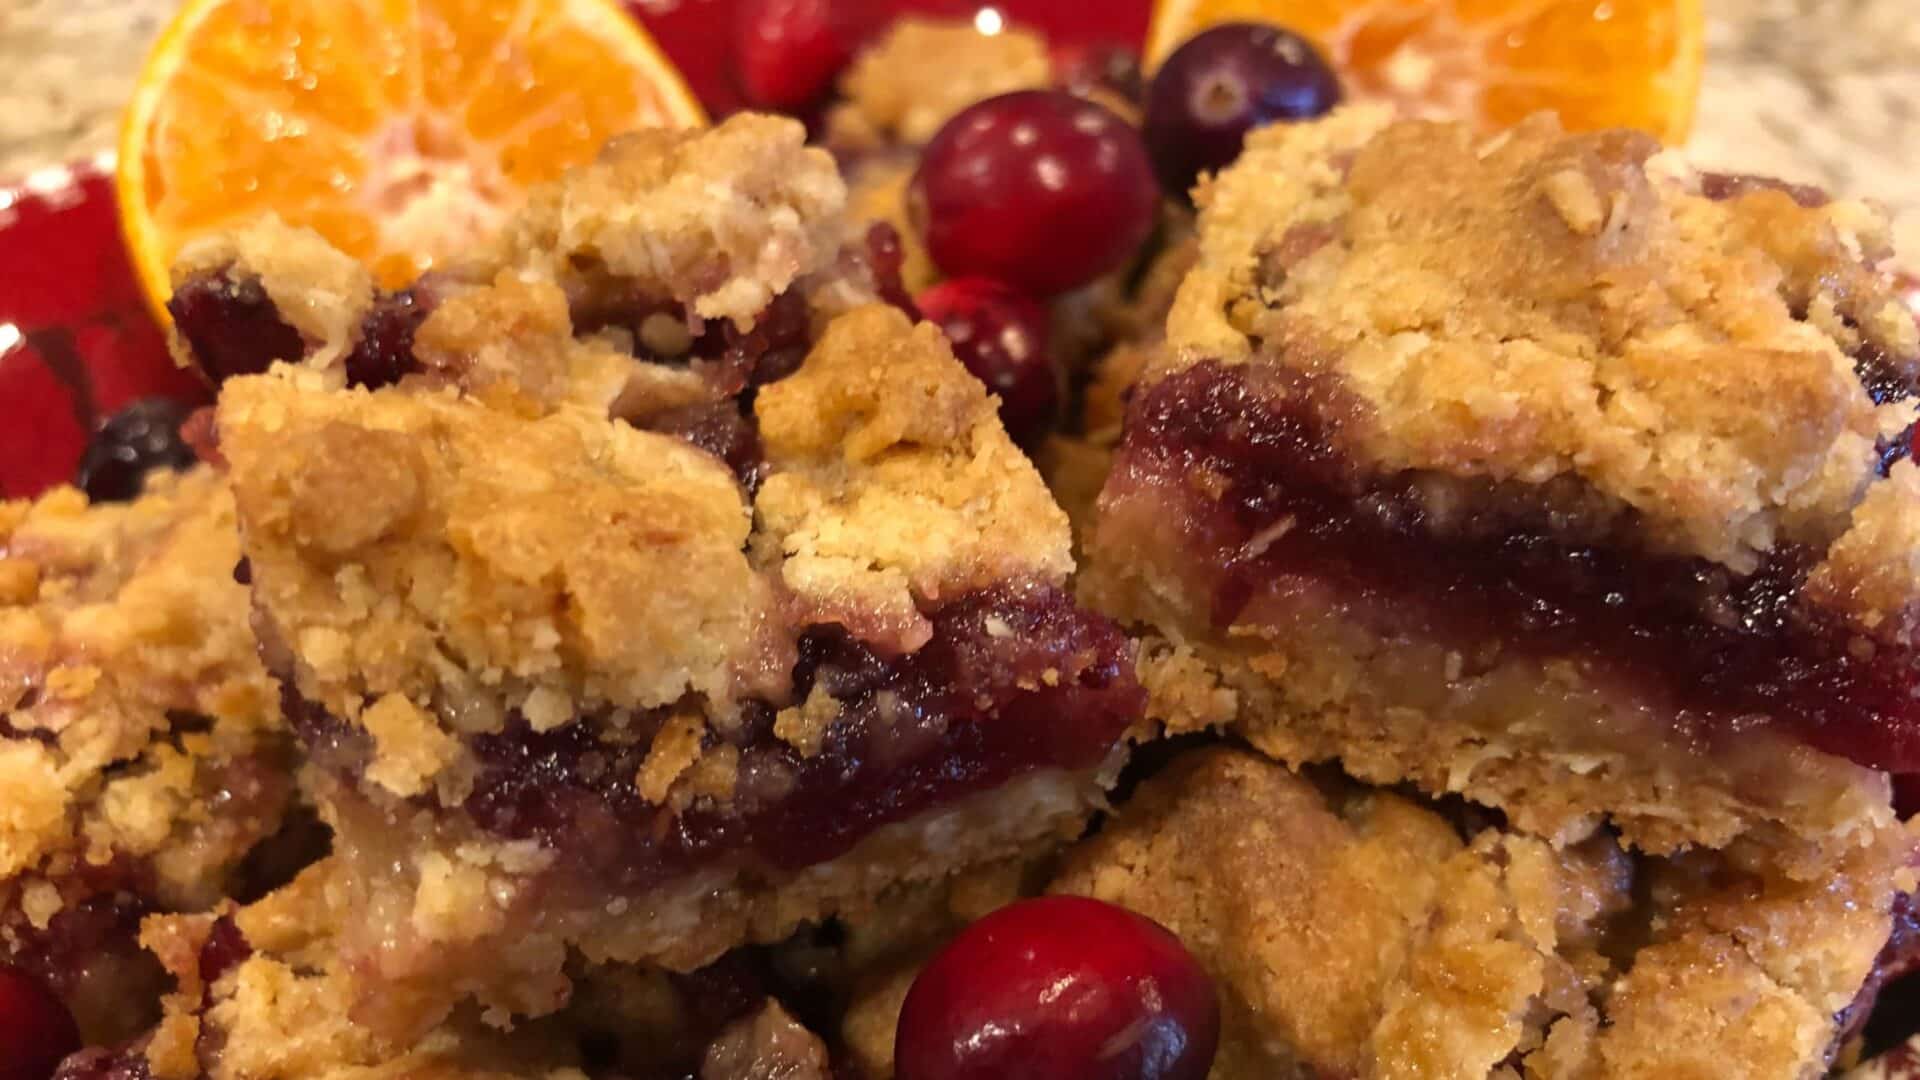 Square bar cookies with golden crumble crust and red filling adorned with cranberries and oranges